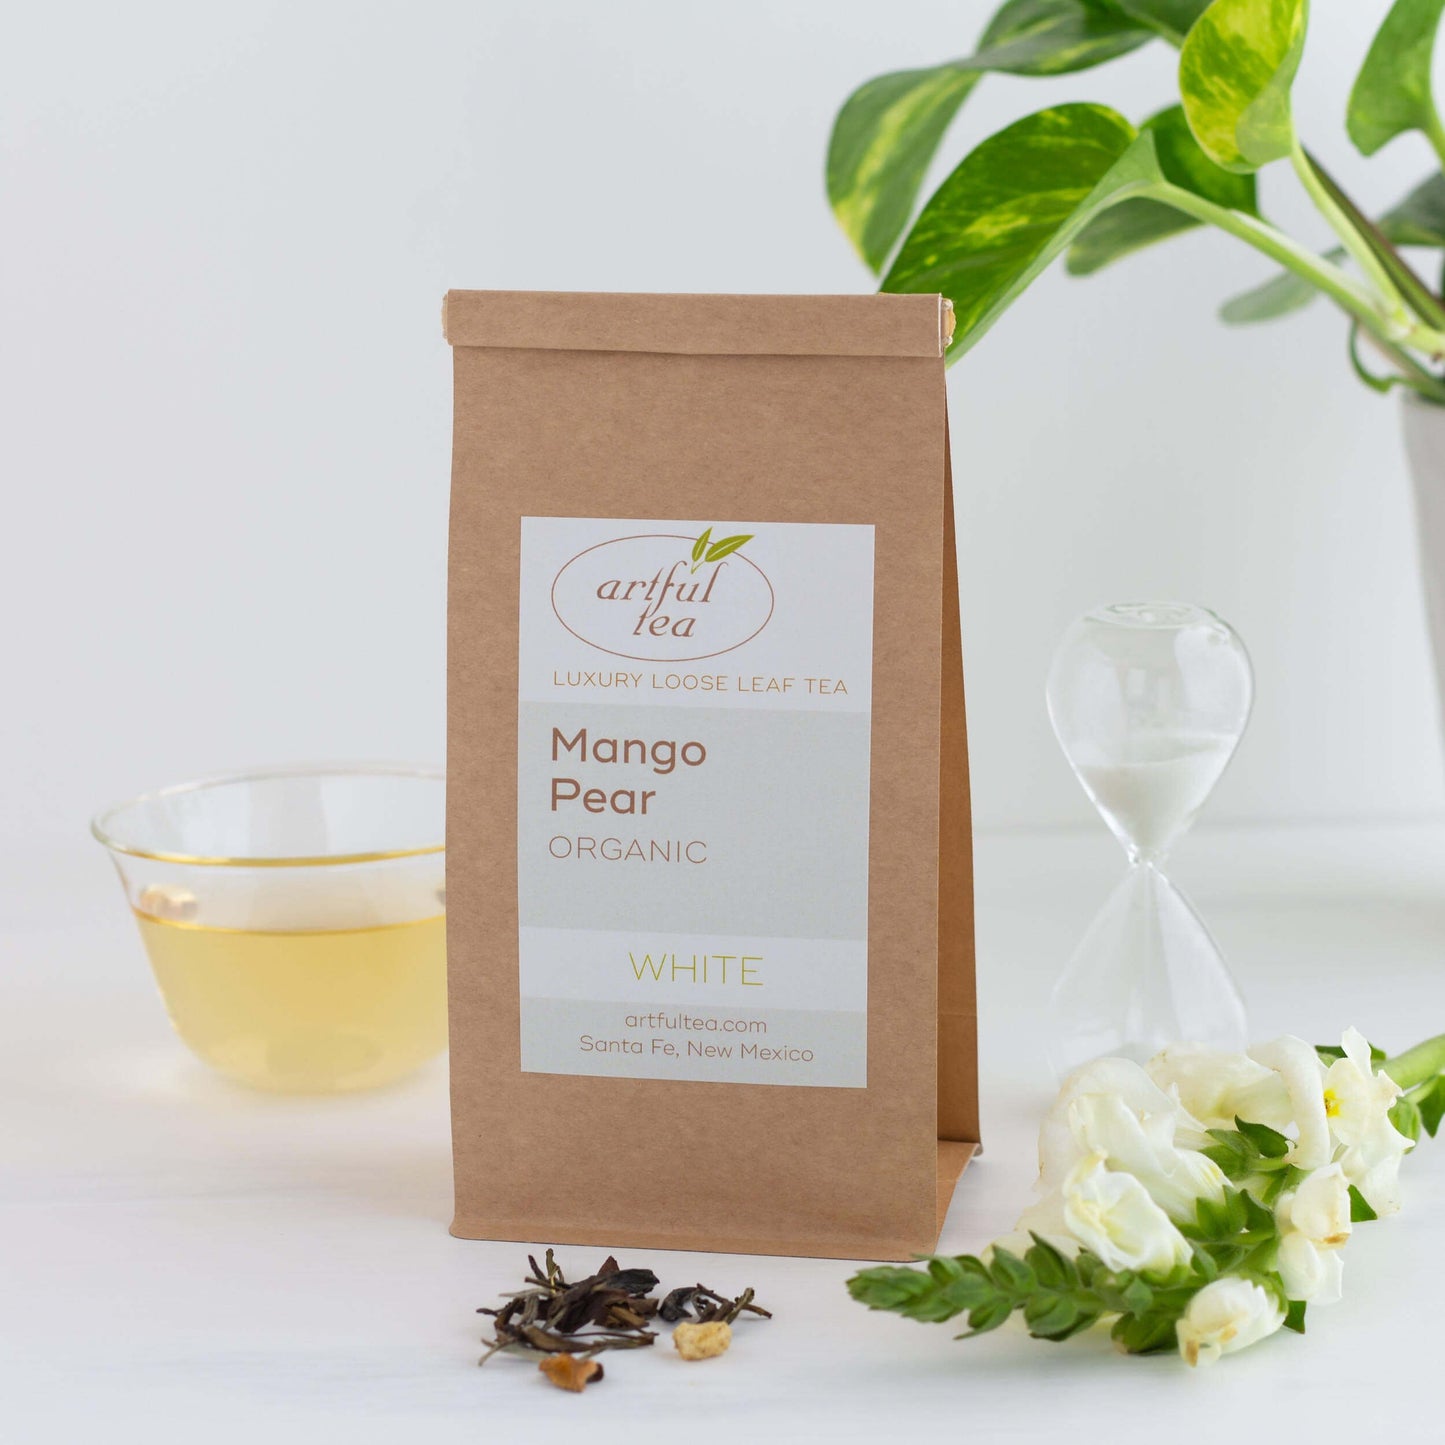 Mango Pear Organic White Tea shown packaged in a kraft bag with some white flowers and loose tea leaves in the foreground. A small sand timer, a green plant, and a small glass of brewed tea are in the background